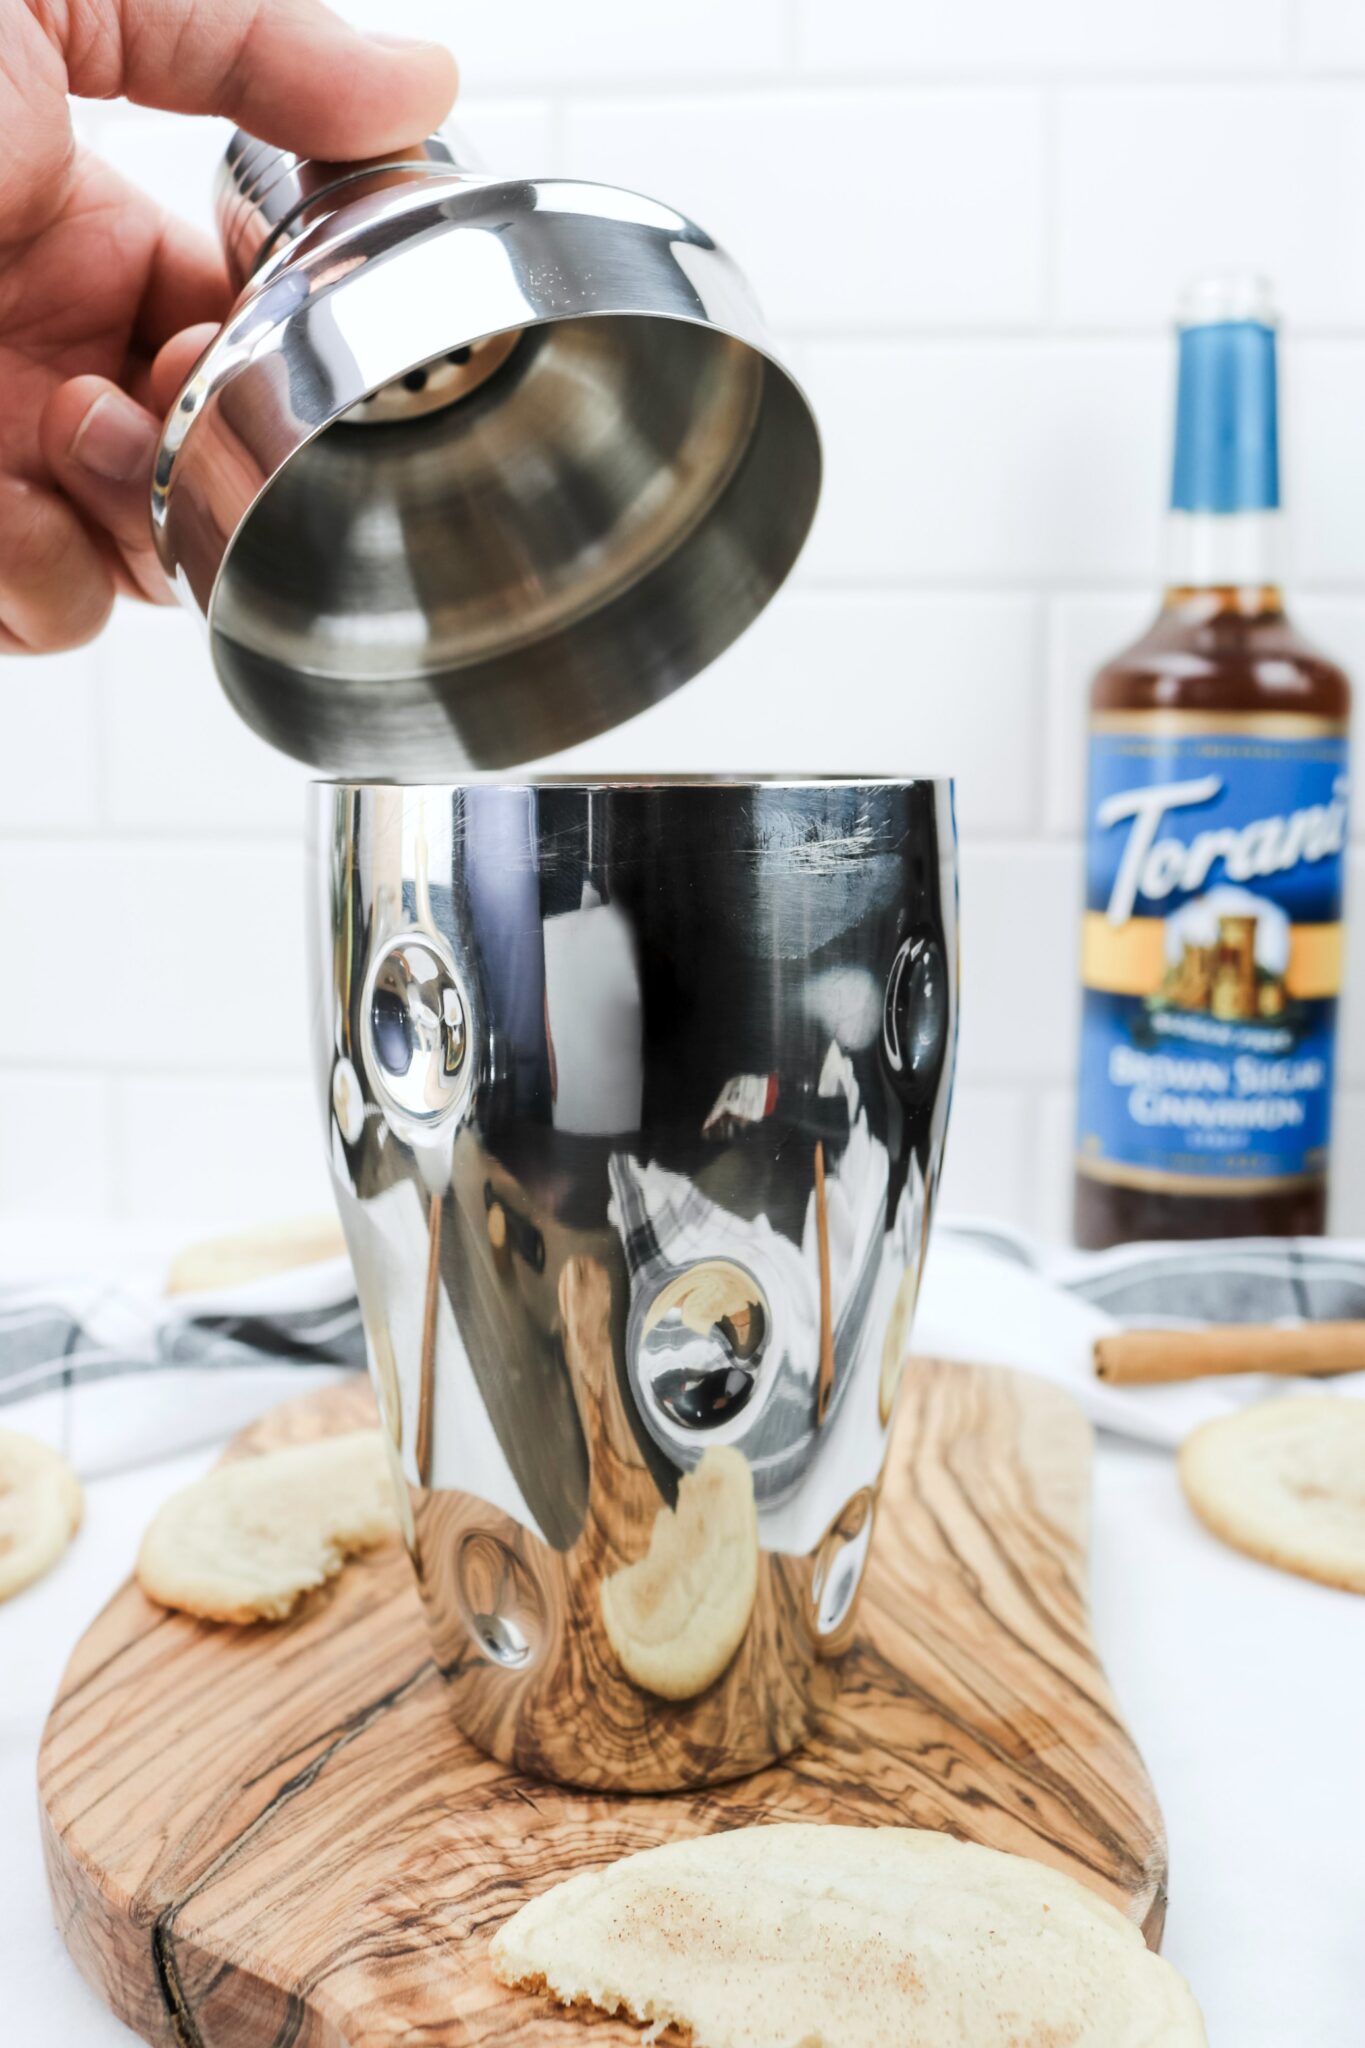 Closing the shaker with all the ingredients to make a Caramel Snickerdoodle Mocktail made with Torani Sugar-Free Brown Sugar and Cinnamon syrup.